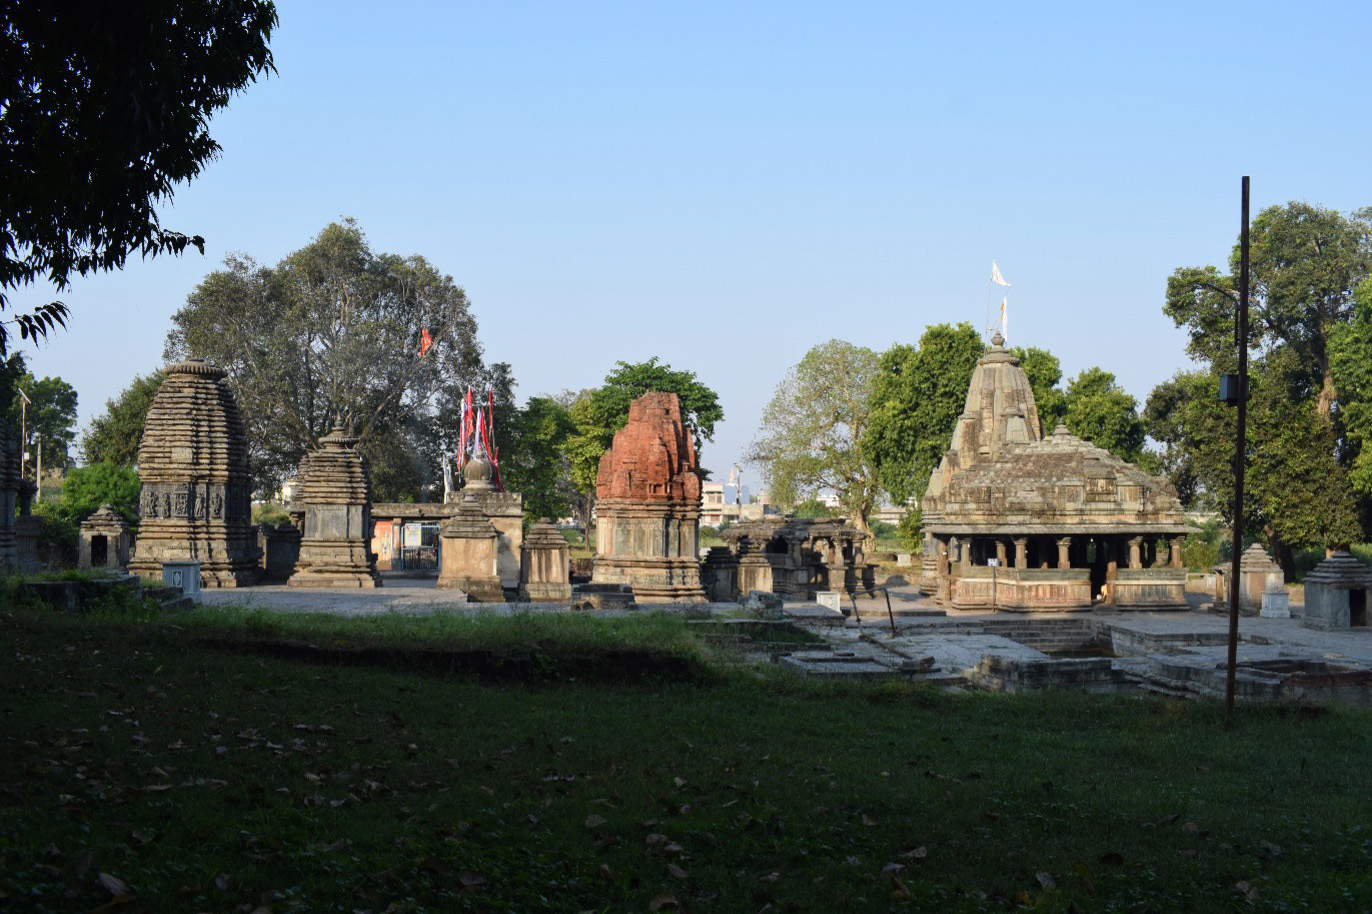 An overview of the Hanuman Garhi Temple complex from the eastern side. Seen here (from left to right) are many Shiva temples, behind it is the Hanuman Temple with a flag, Kumbheshwar Temple and Nilkhanth Mahadev Temple with the Surya Kund in front of it.